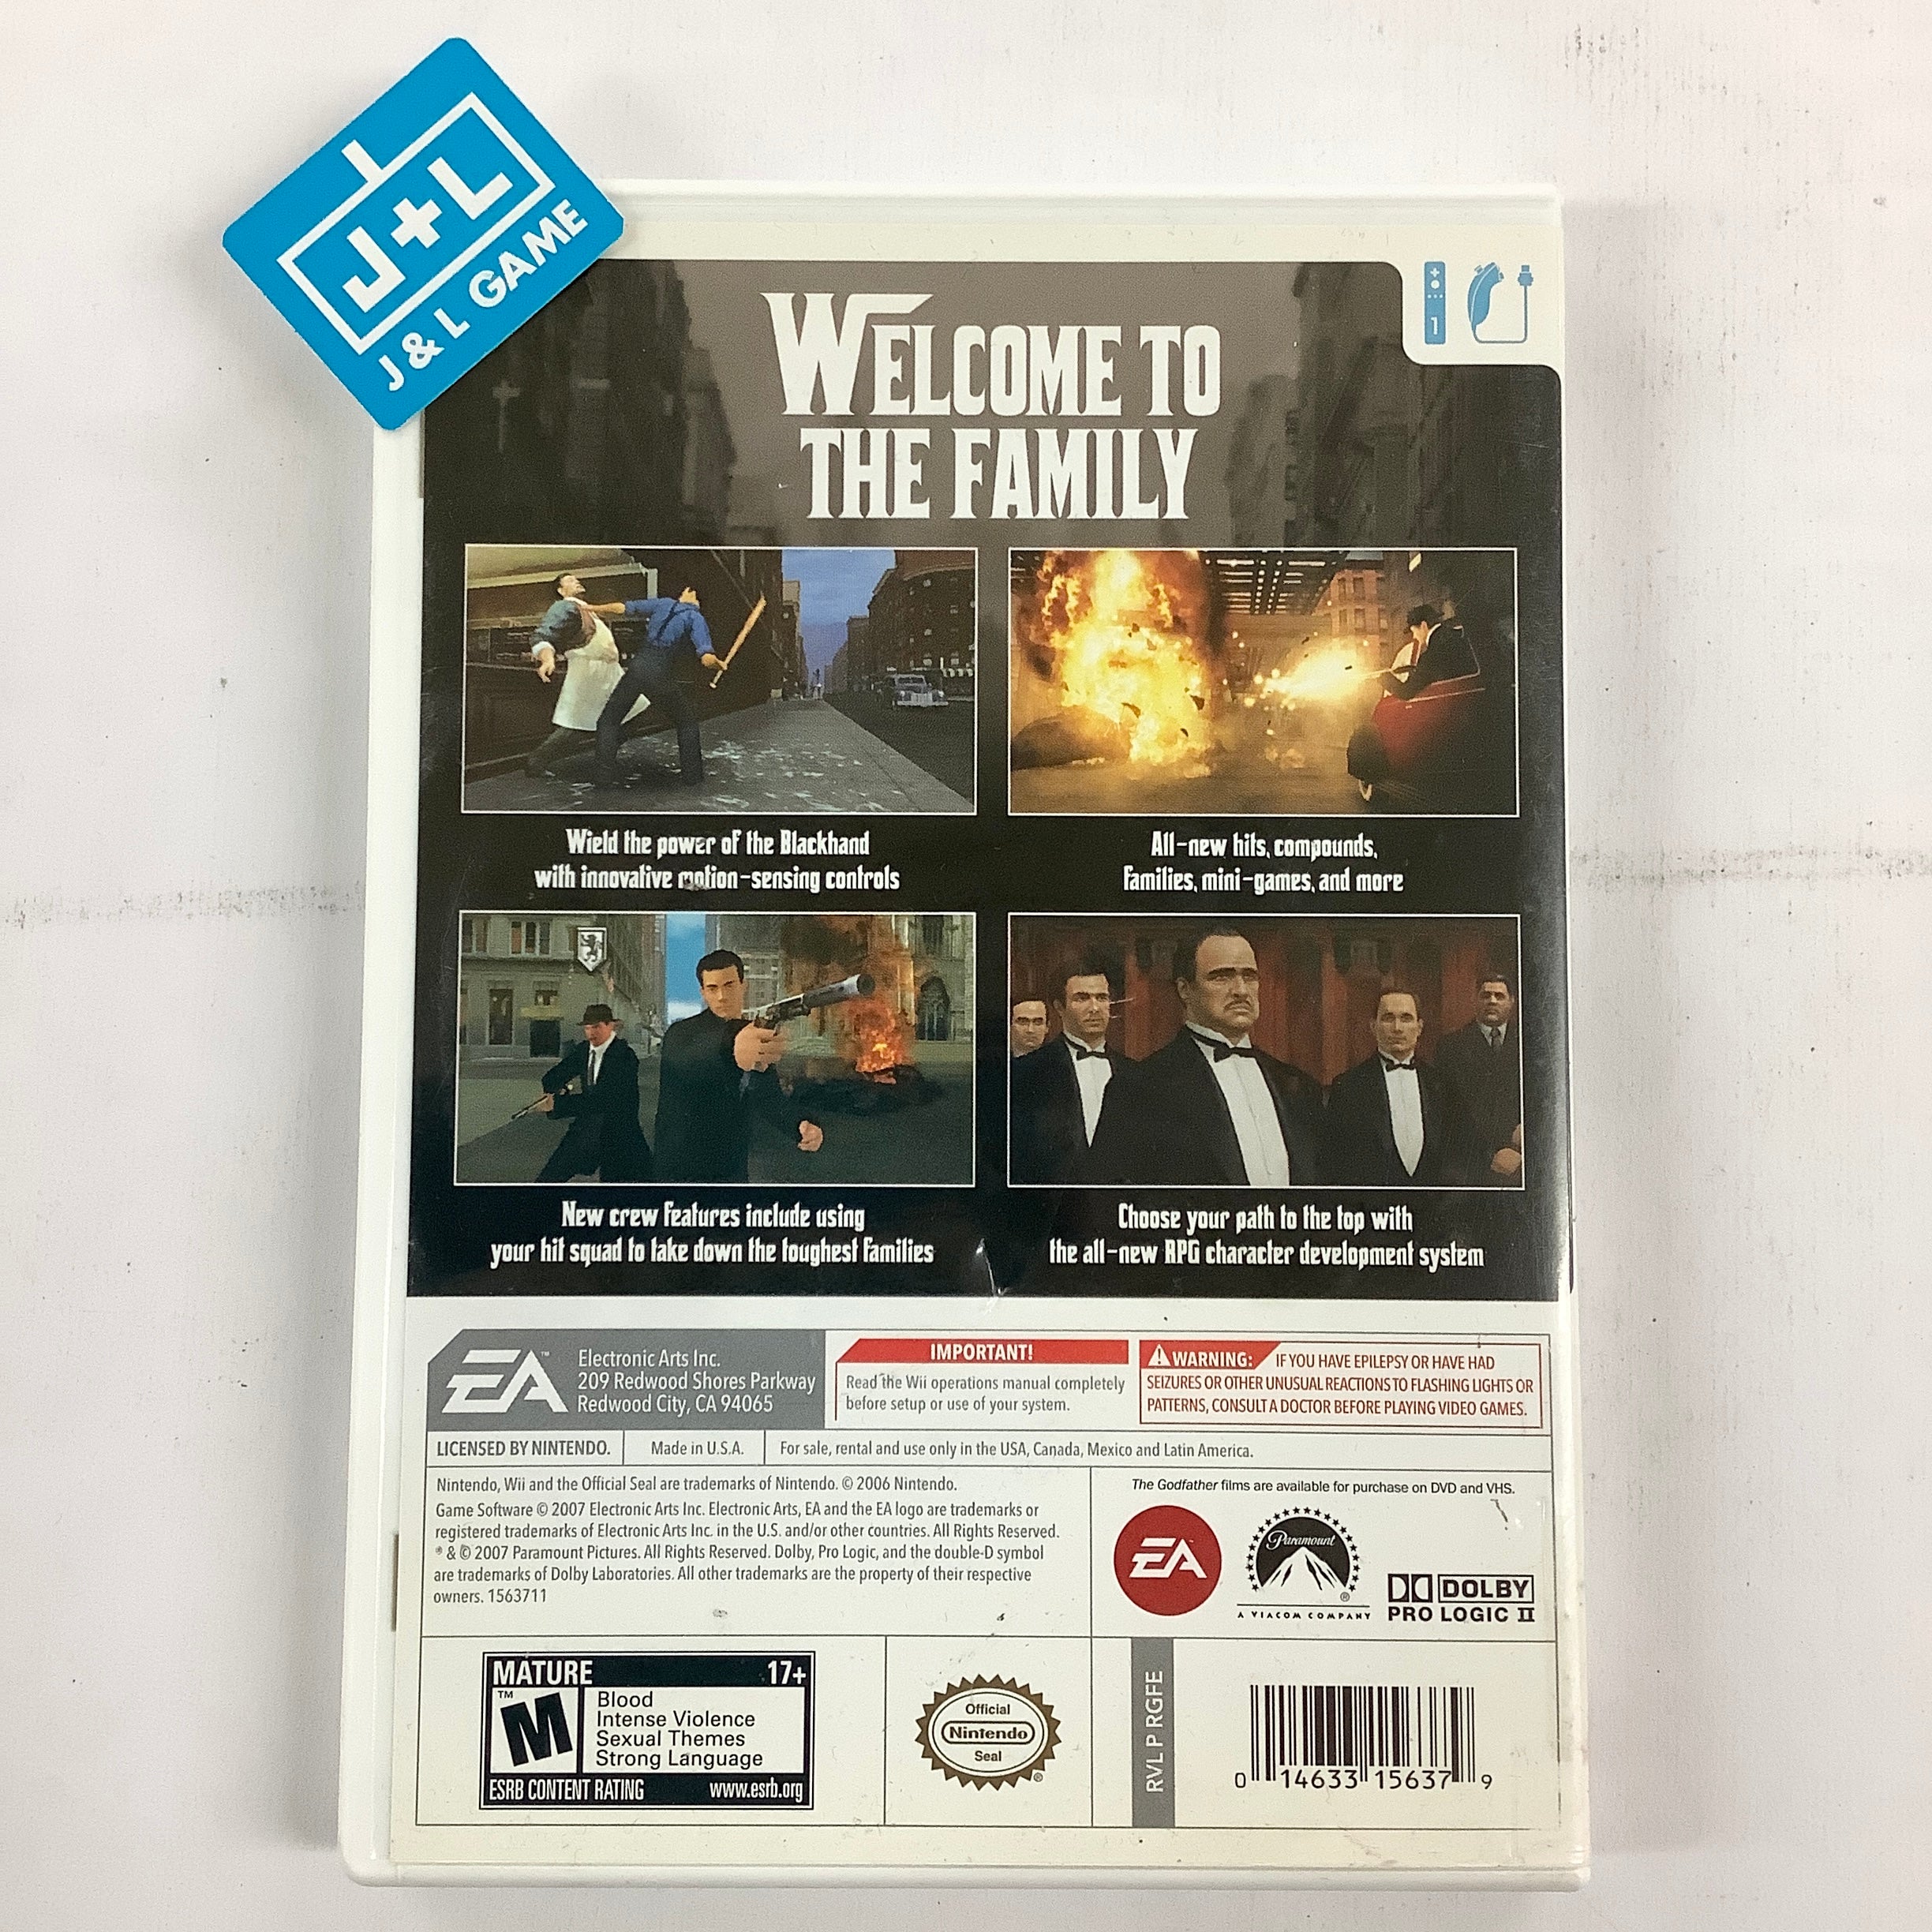 The Godfather: Blackhand Edition - Nintendo Wii [Pre-Owned] Video Games Electronic Arts   